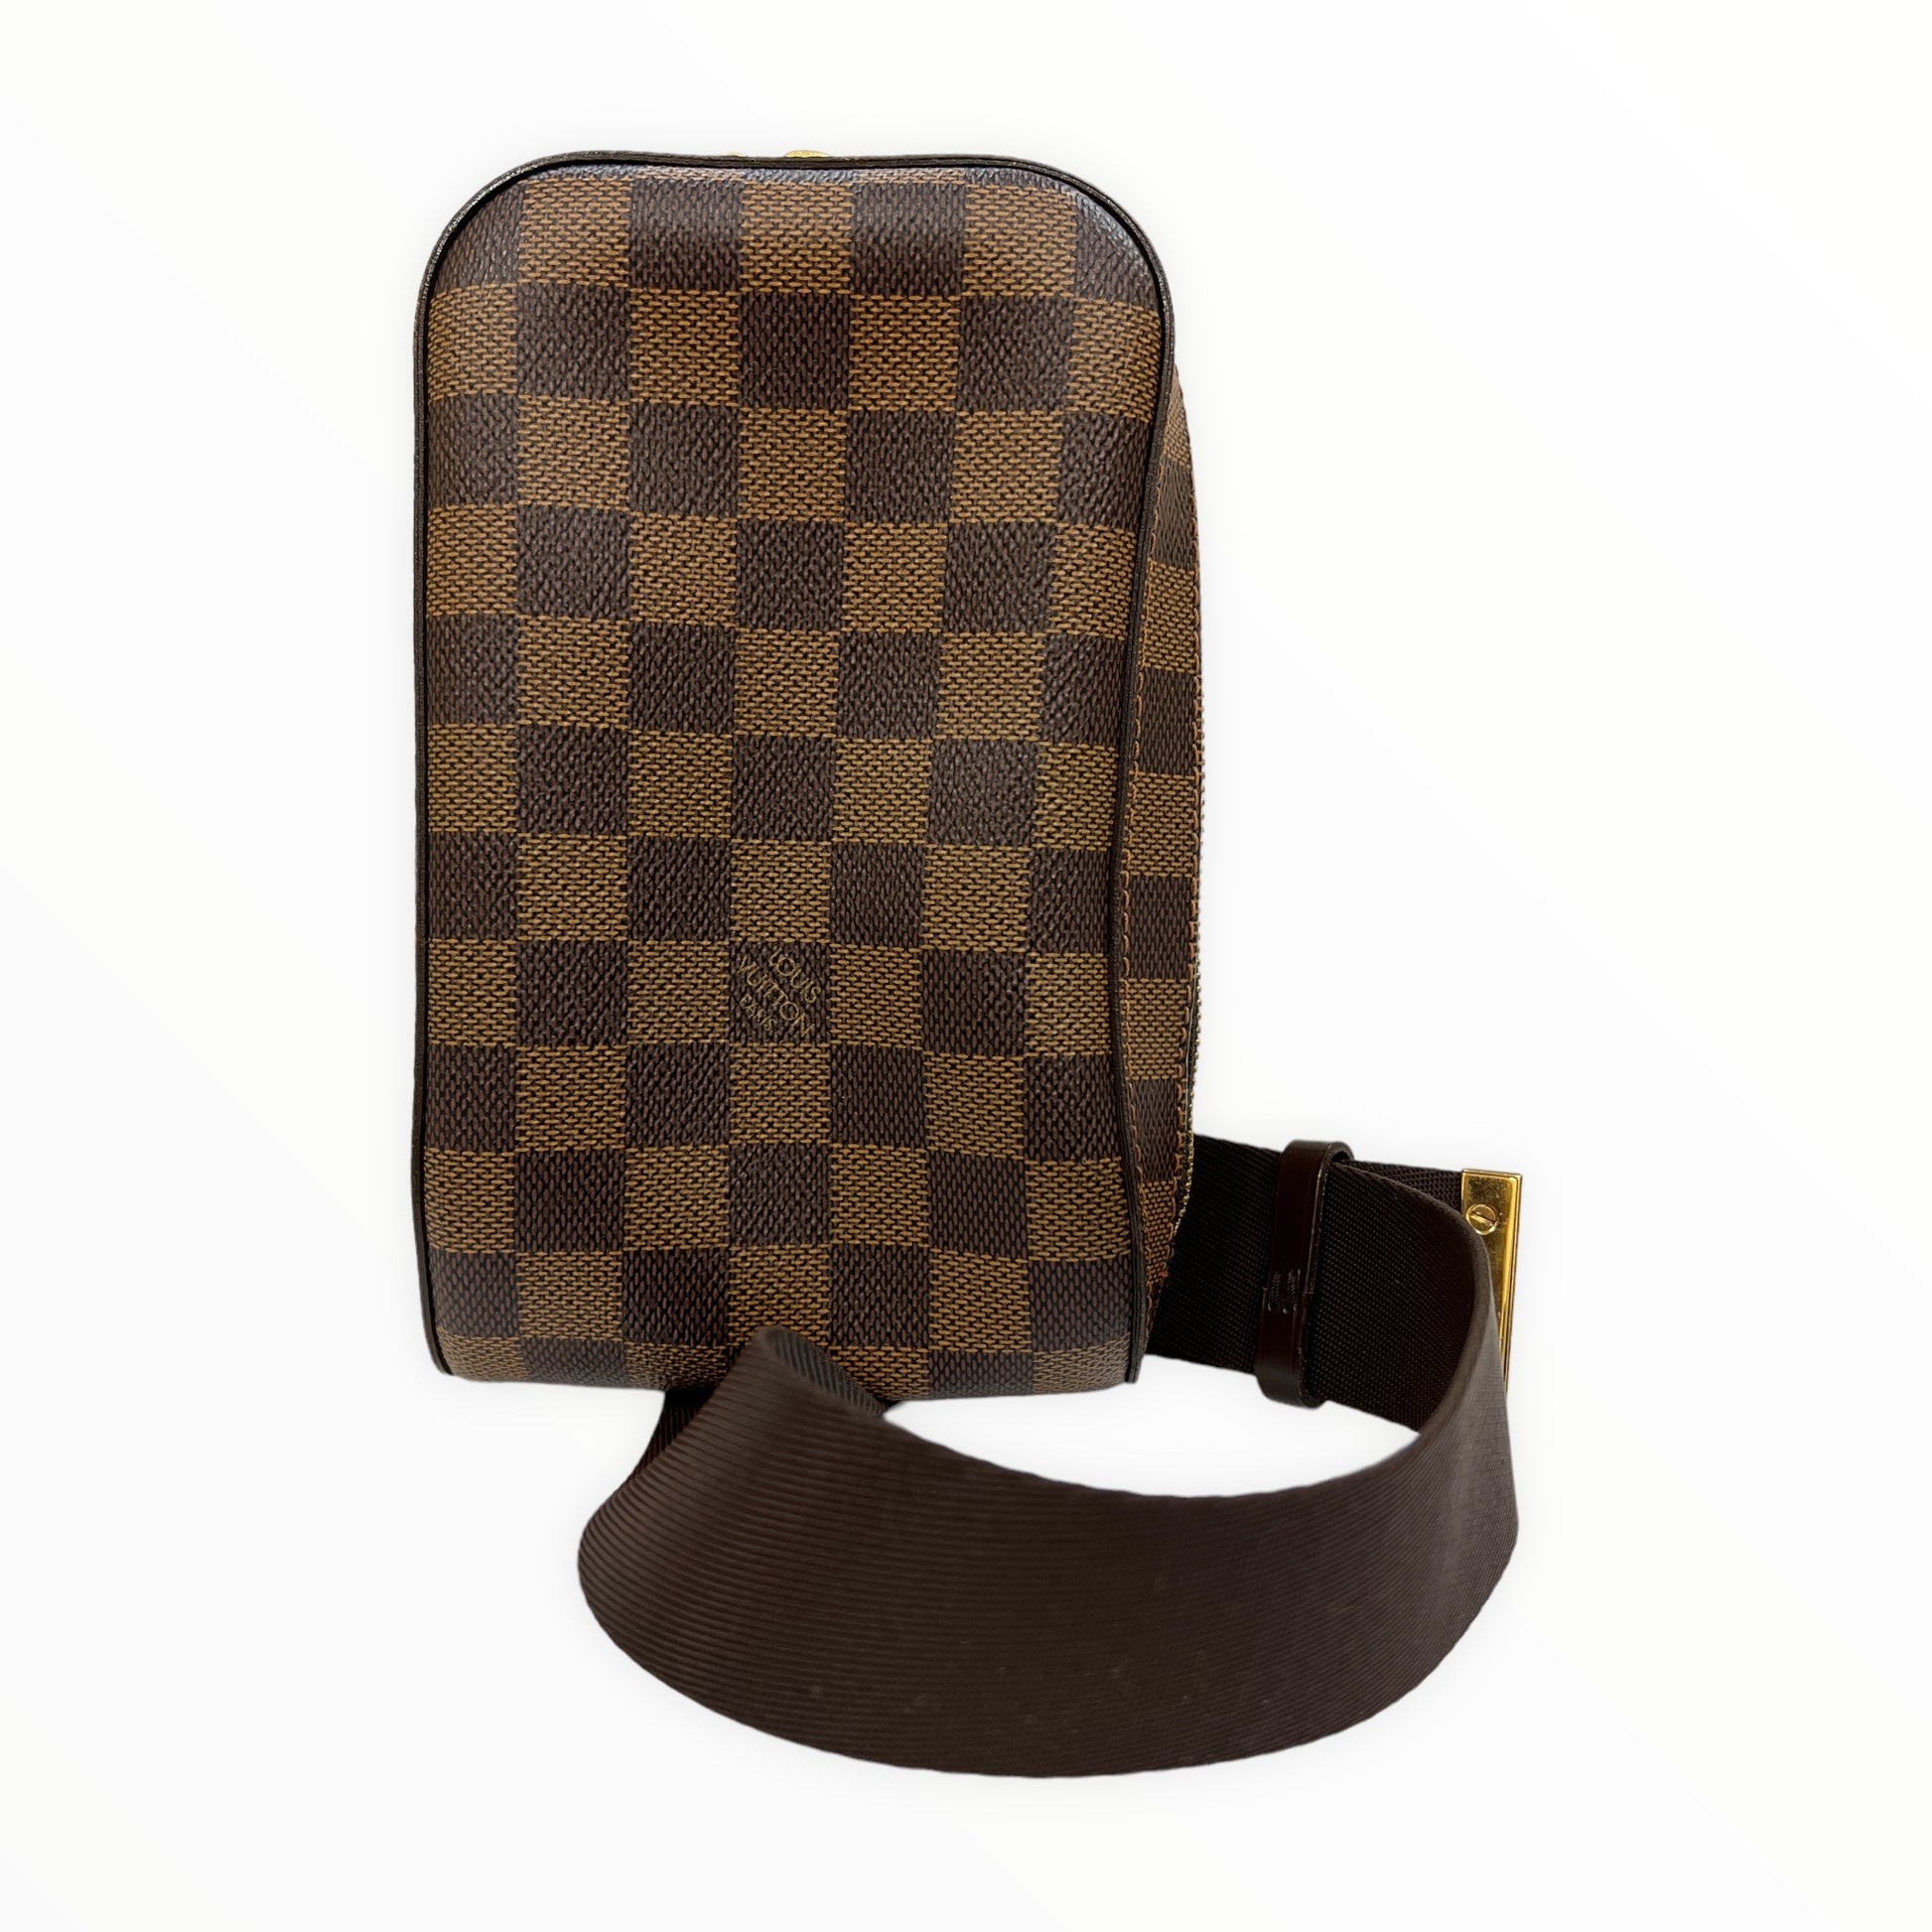 Buy designer Belt Bags by louis-vuitton at The Luxury Closet.